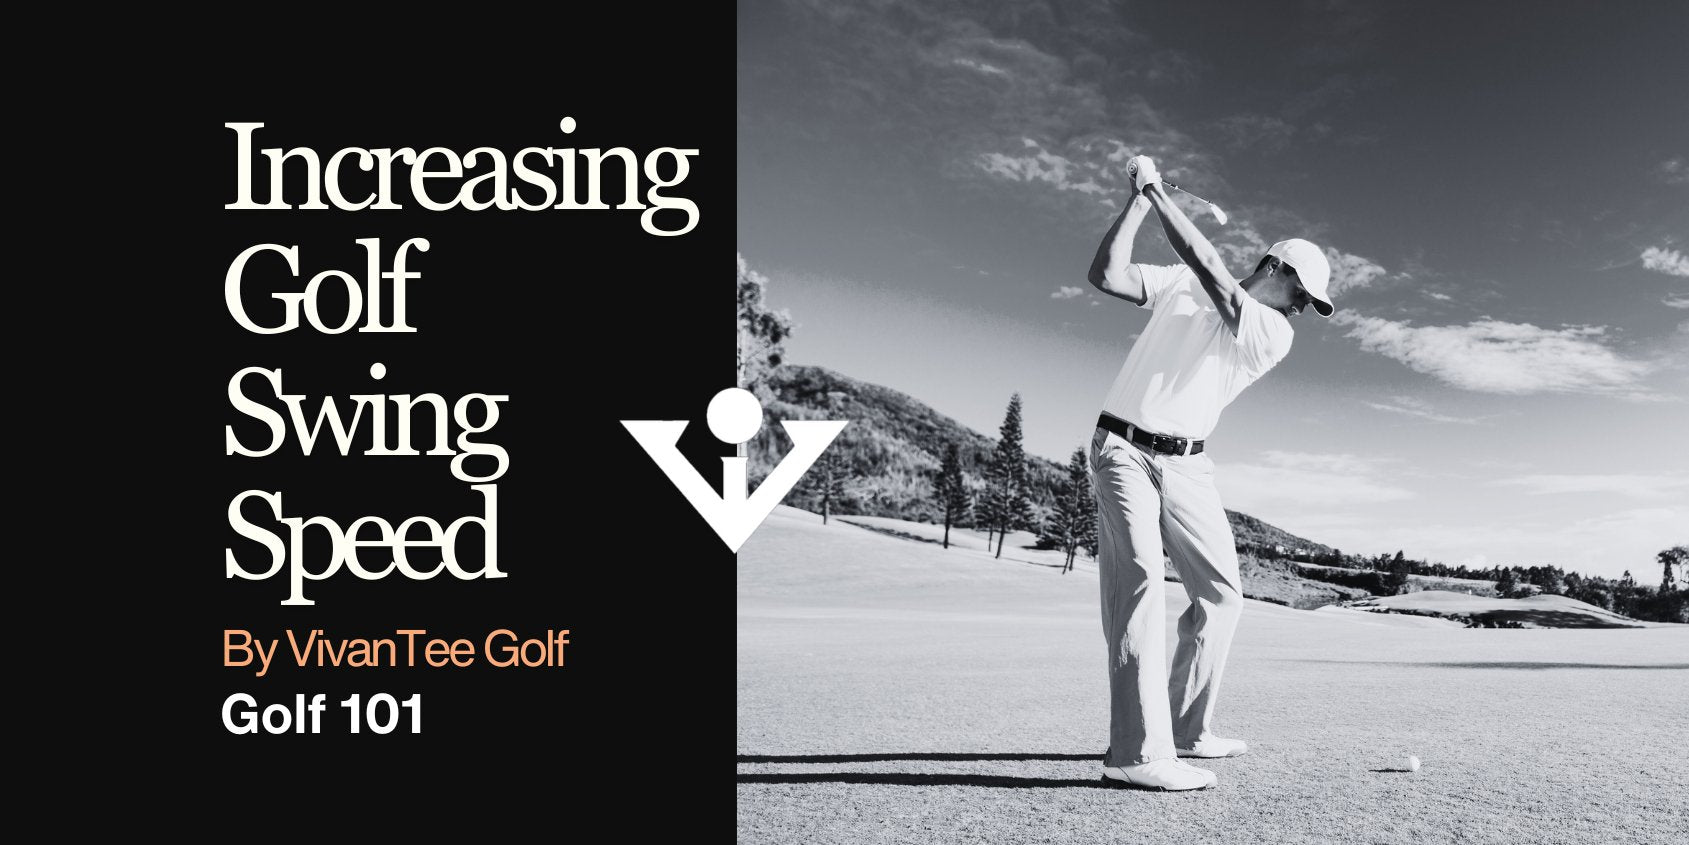 Informational article for golf swing speeds, image includes golf at the end of his swing